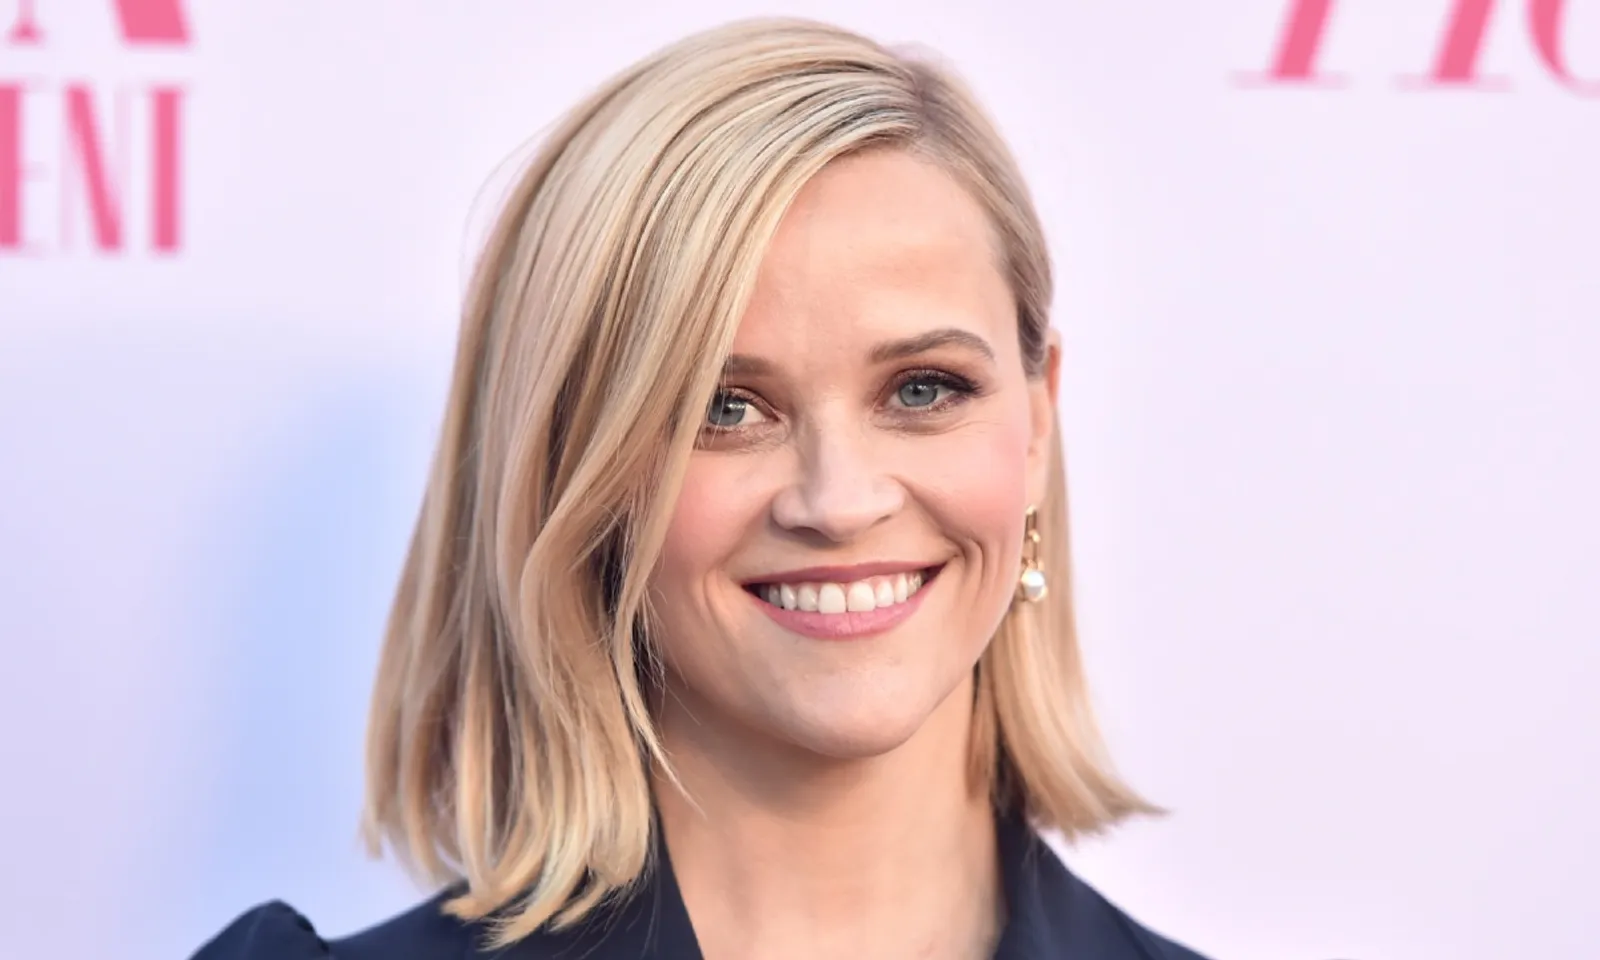 7 Potret Terkini Reese Witherspoon, Bukan Lagi Miss 'Legally Blonde'